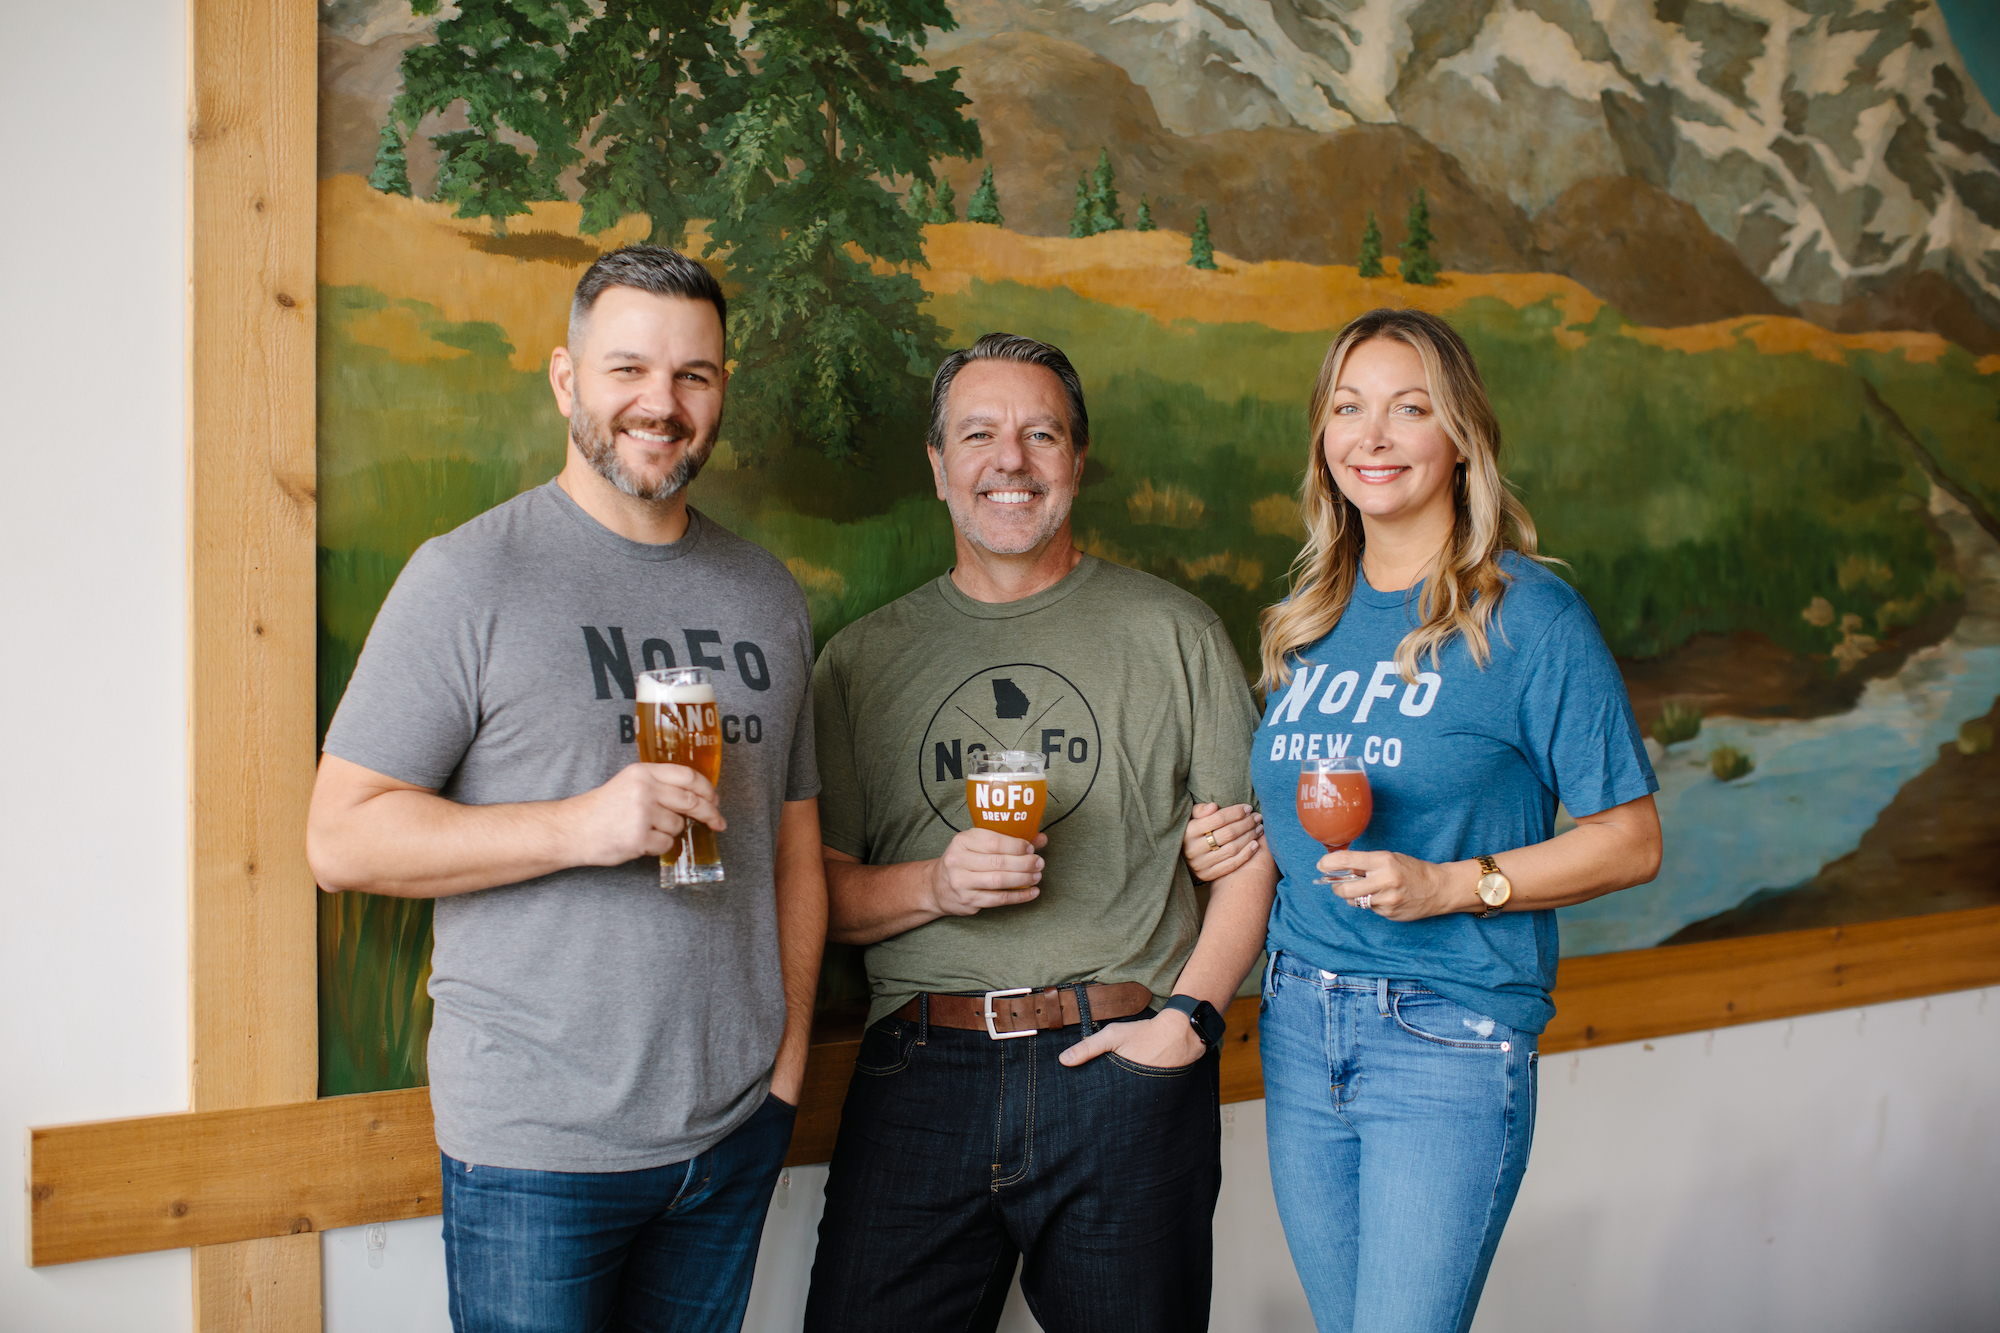 NoFo Brew Co Reaches a Deal to Acquire Land, Building and Assets of Tantrum Brewing